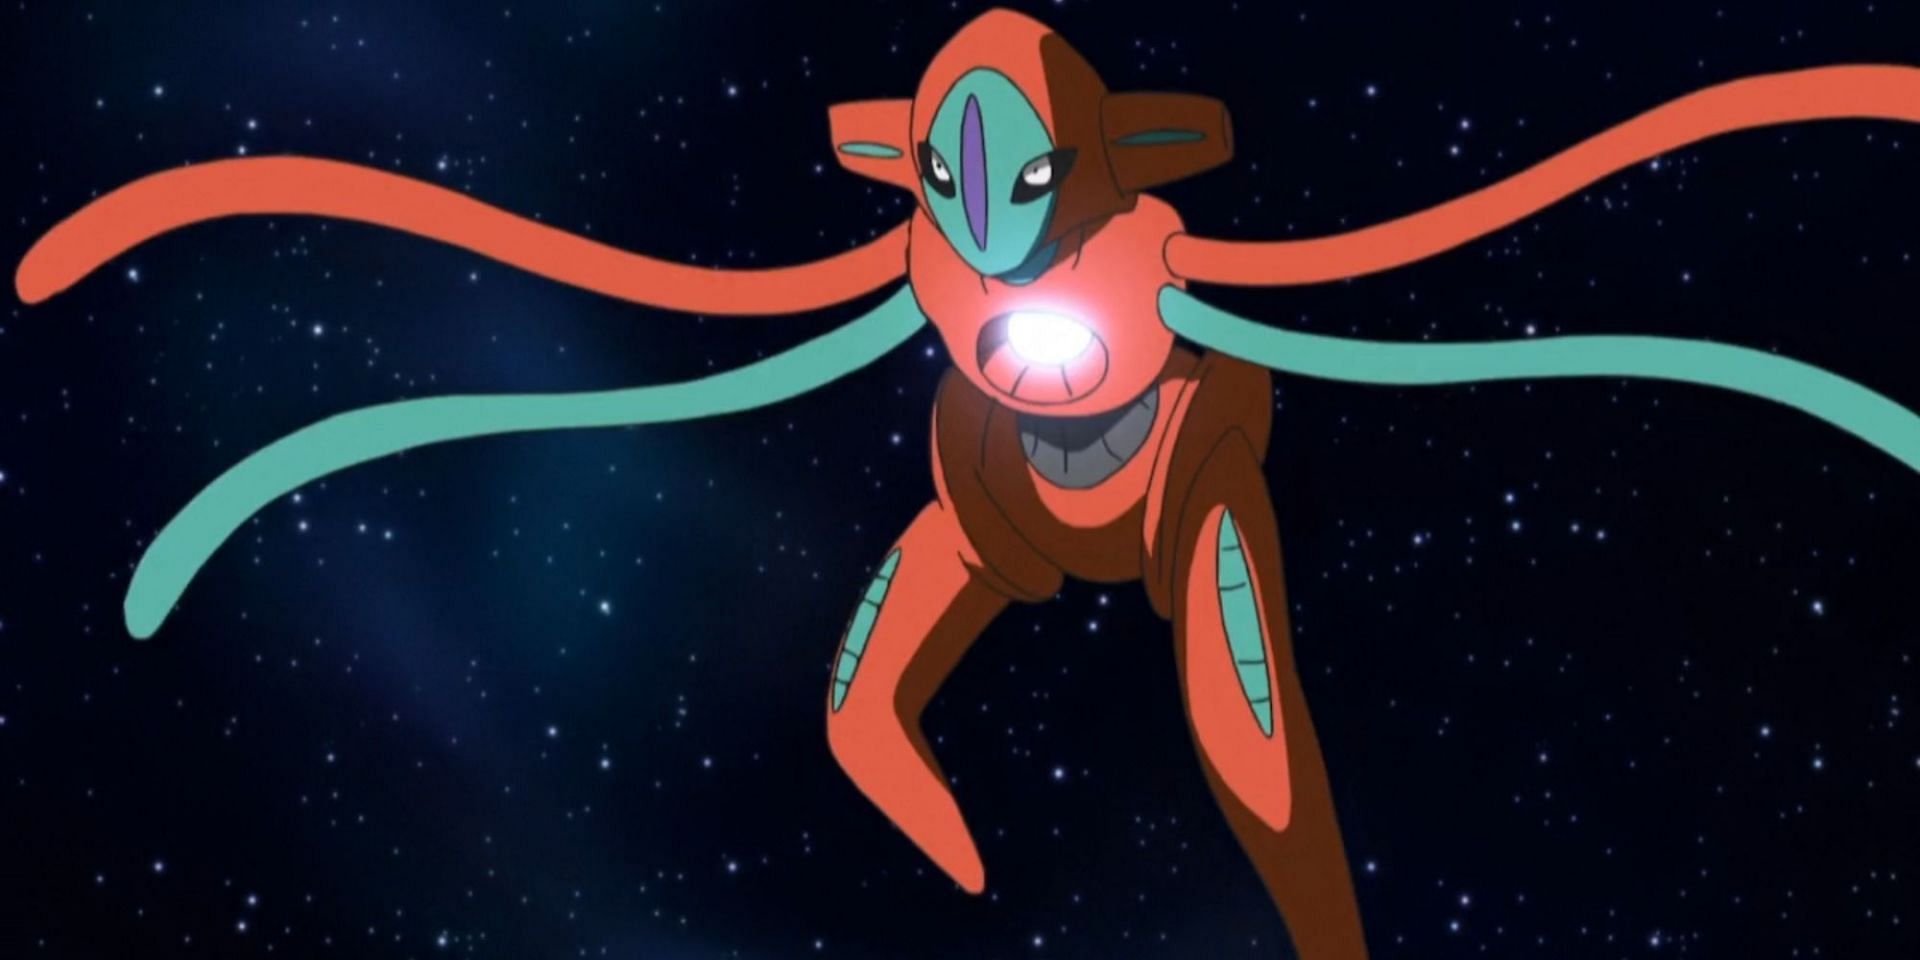 Deoxys in the anime. (Image via The Pokemon Company)